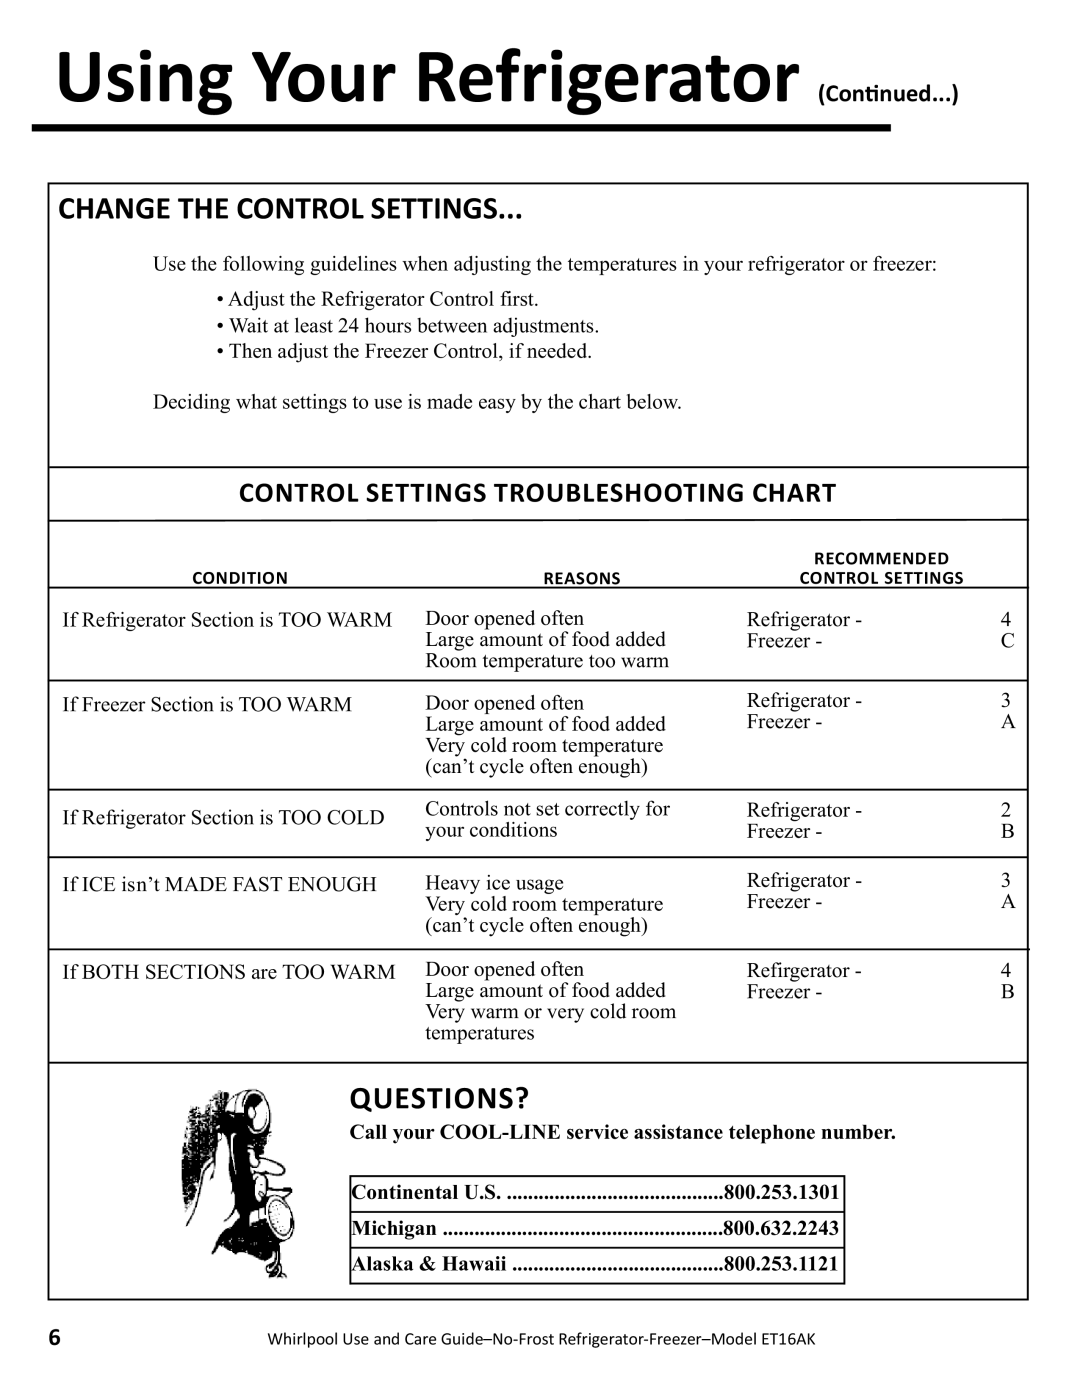 Whirlpool ET16AK manual Using Your Refrigerator Con/nued, Change The Control Settings, Questions ? 